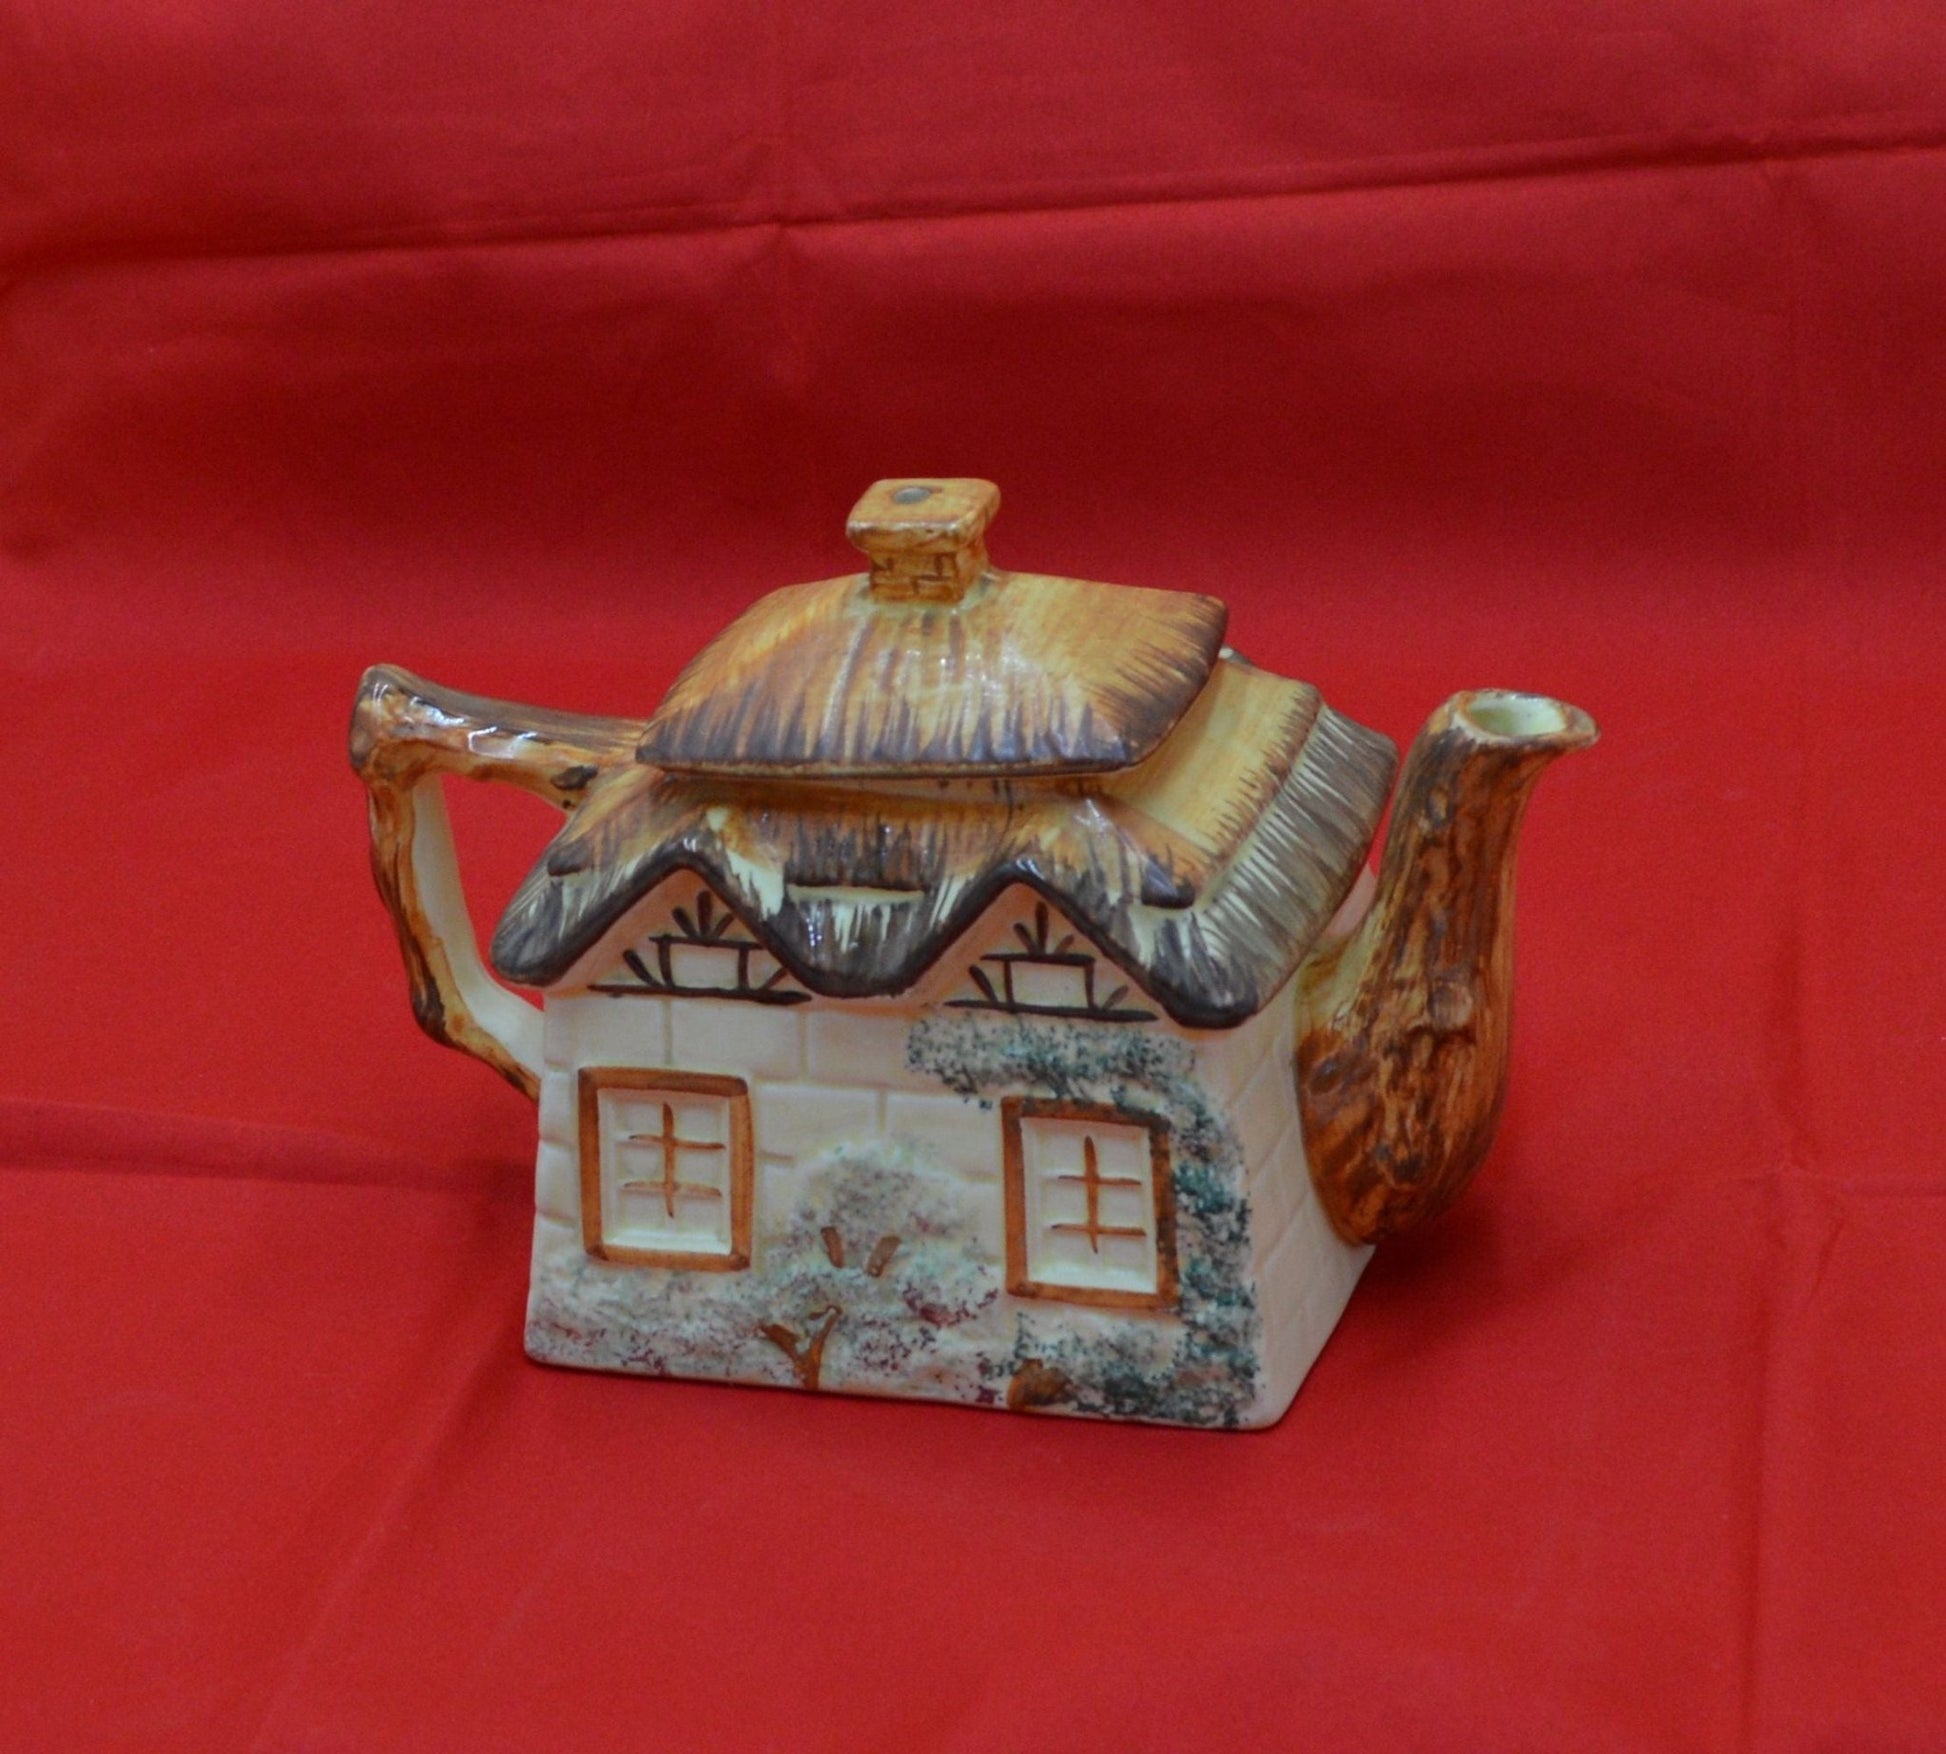 KEELE STREET POTTERY COTTAGEWARE TEAPOT (PREVIOUSLY OWNED) FAIRLY GOOD CONDITION - TMD167207